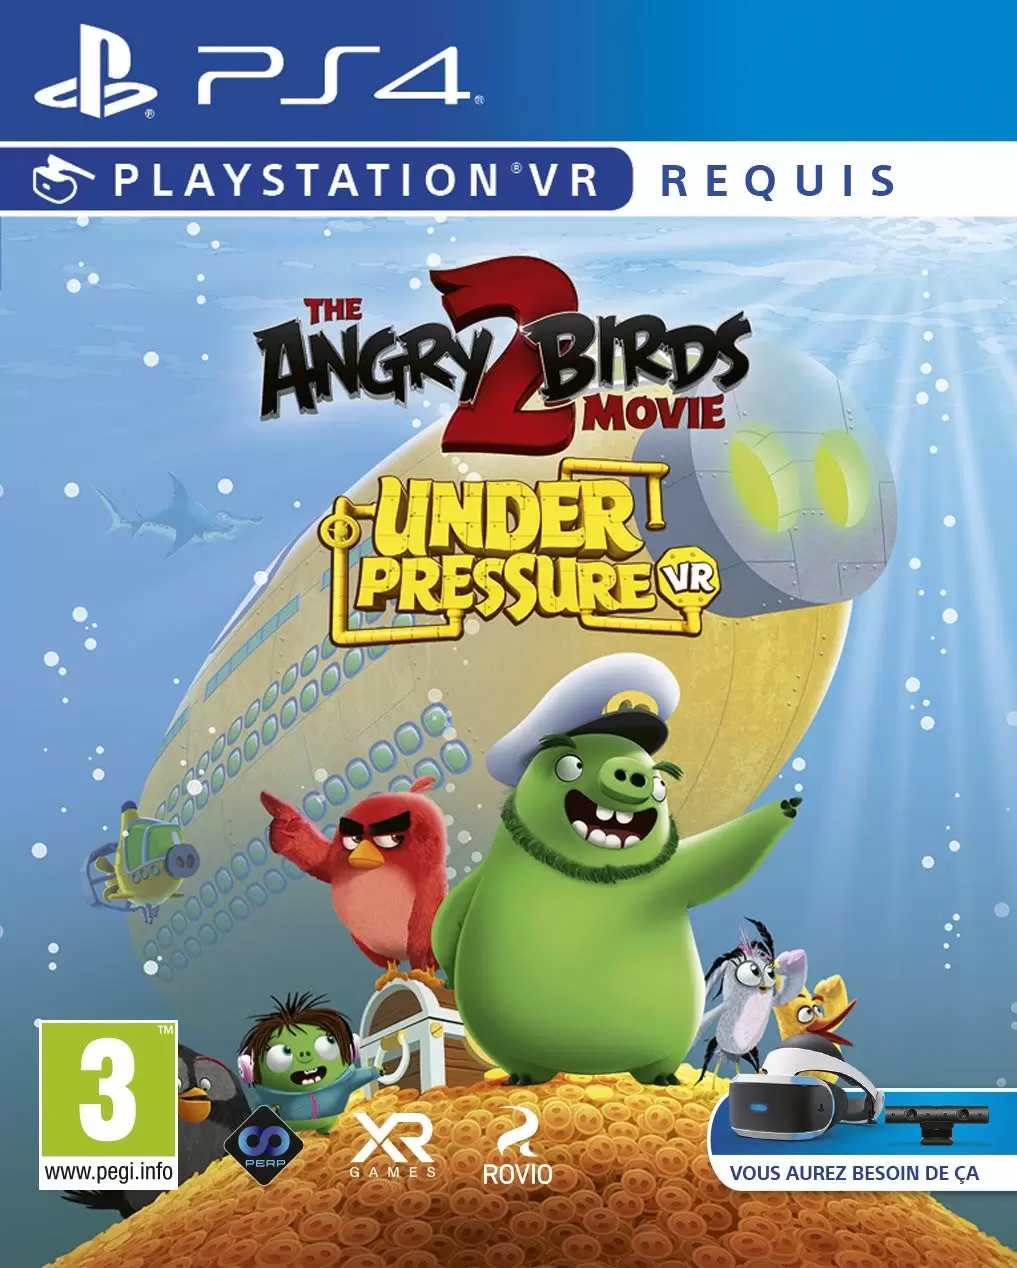 Jeux PS4 - The Angry Birds Movie 2 - Under Pressure VR